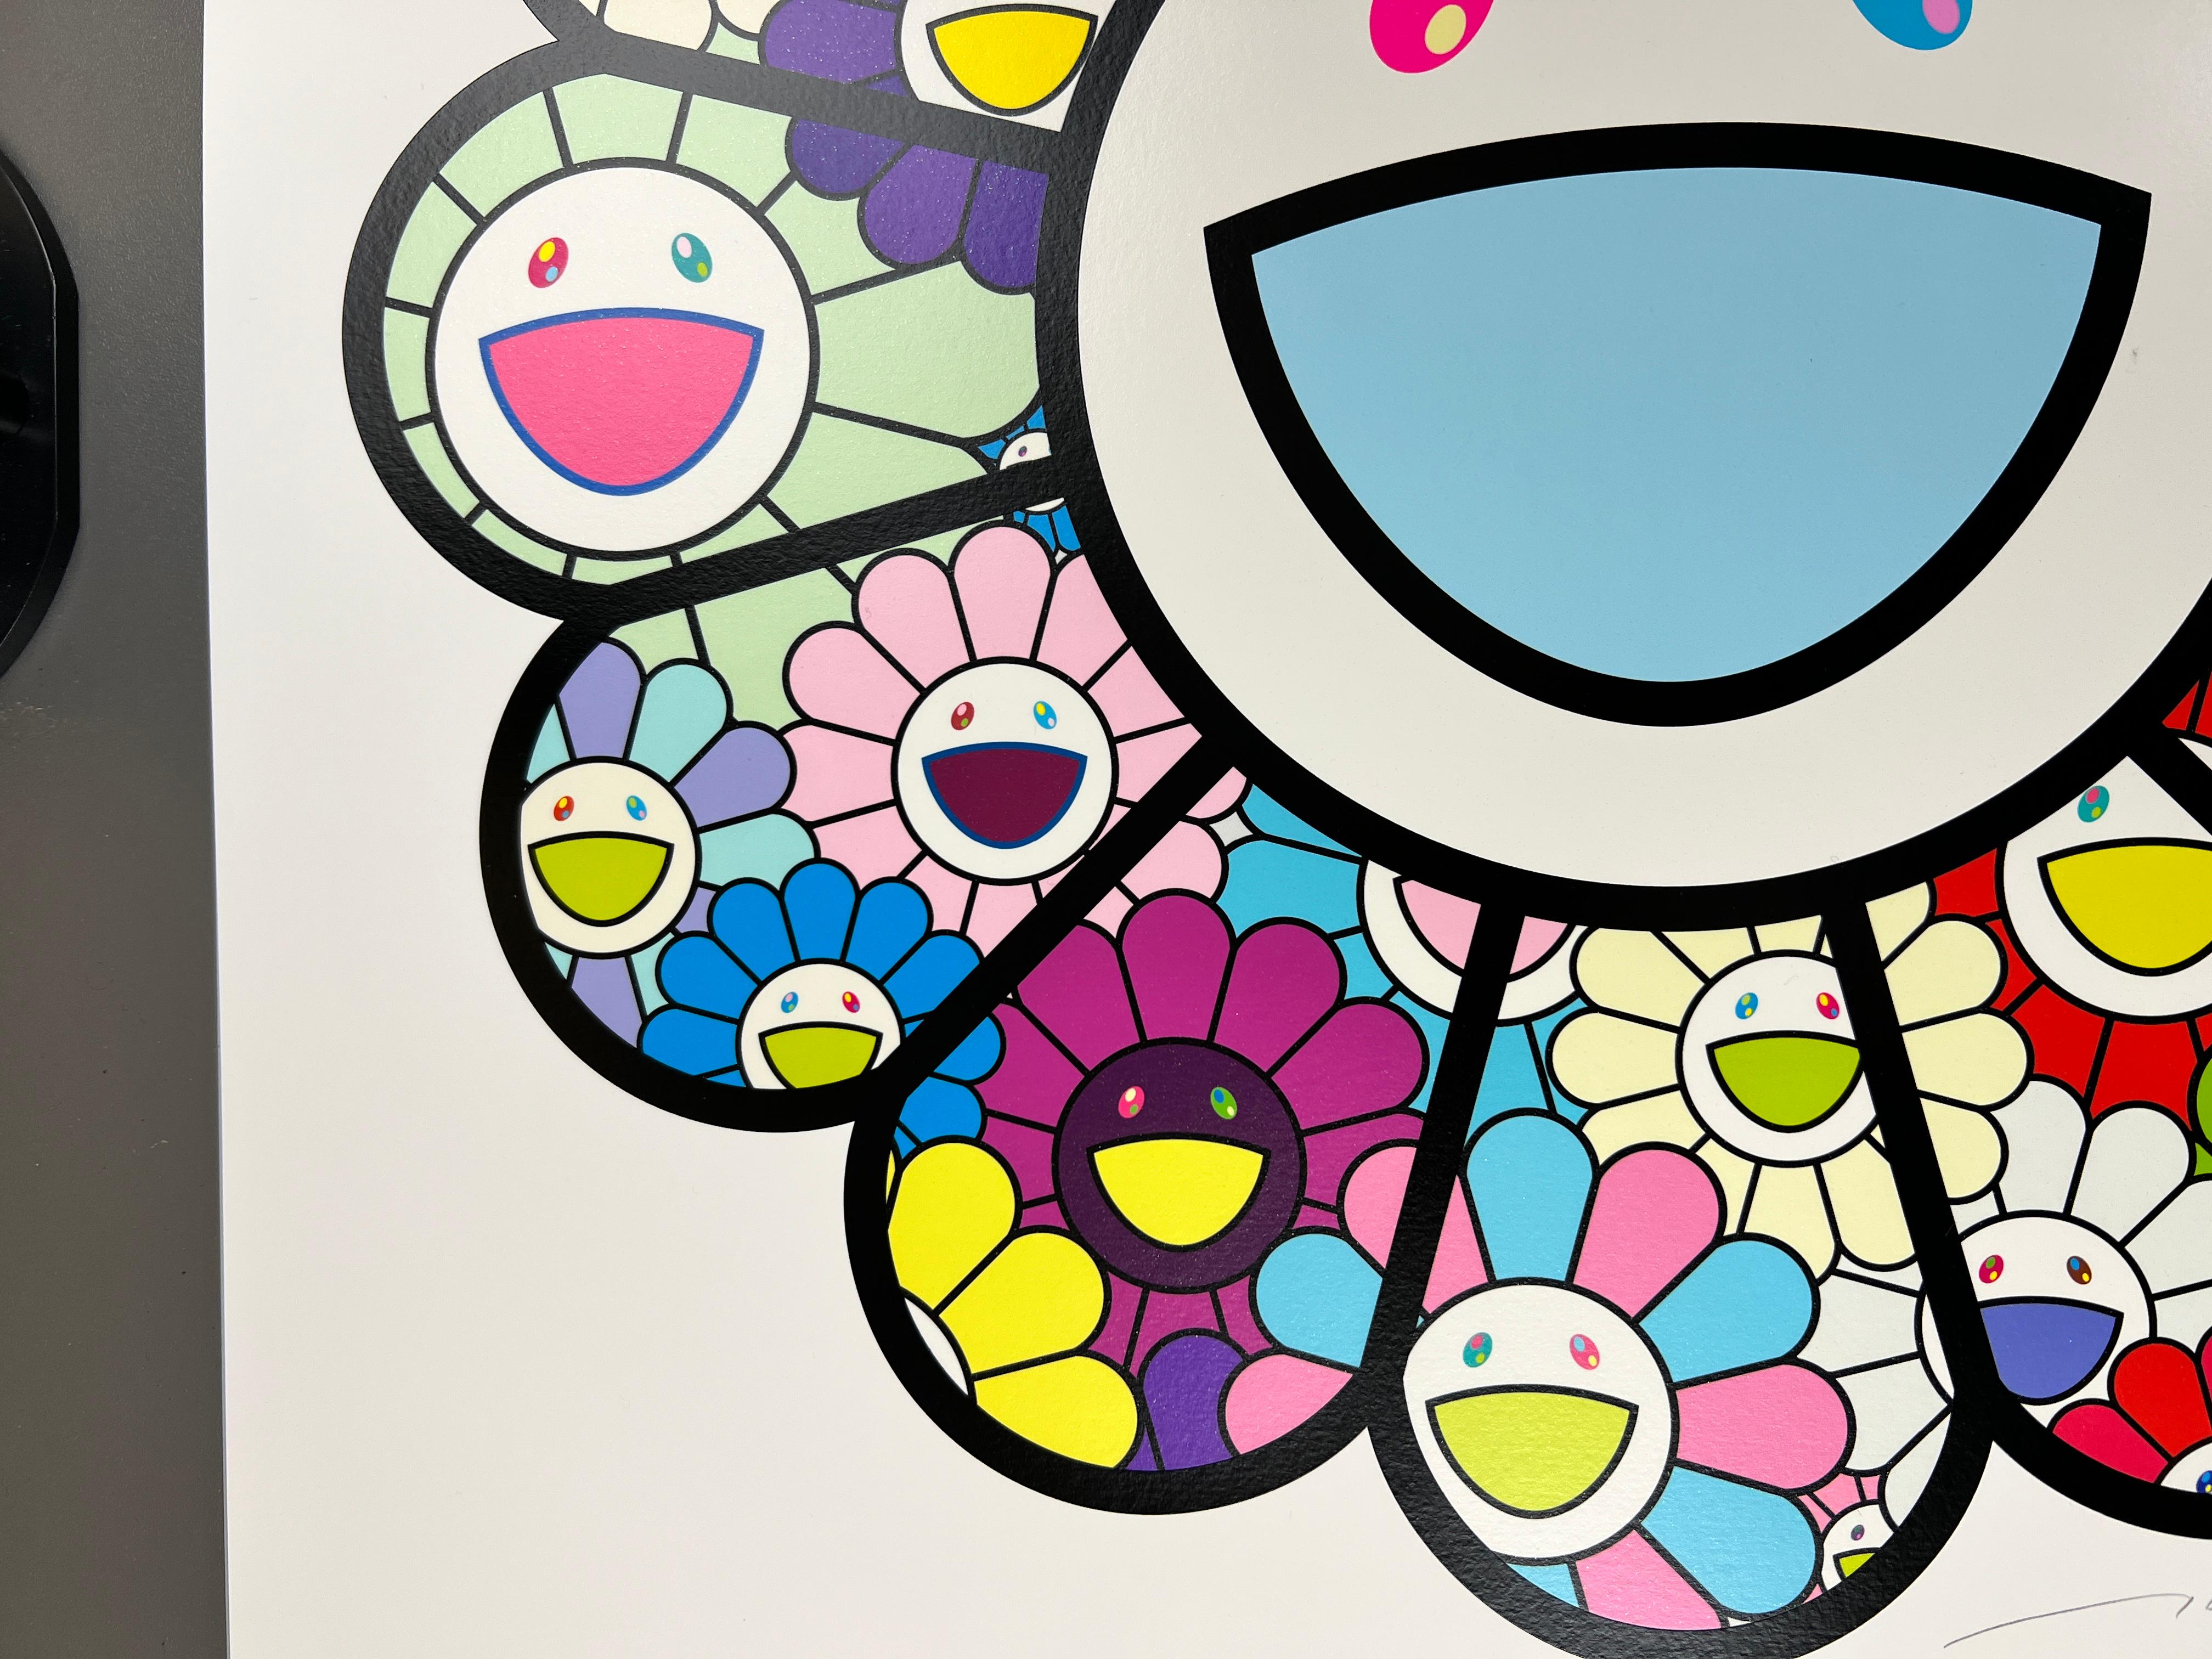 Artist: Takashi Murakami
Title: Flowers in Pastel Colors
Year: 2022
Edition: 100
Size: 500 x 500mm (sheet size)
Medium: Archival pigment print + Silkscreen

This is hand signed by Takashi Murakami.

Note: This will be shipped from Japan so the buyer